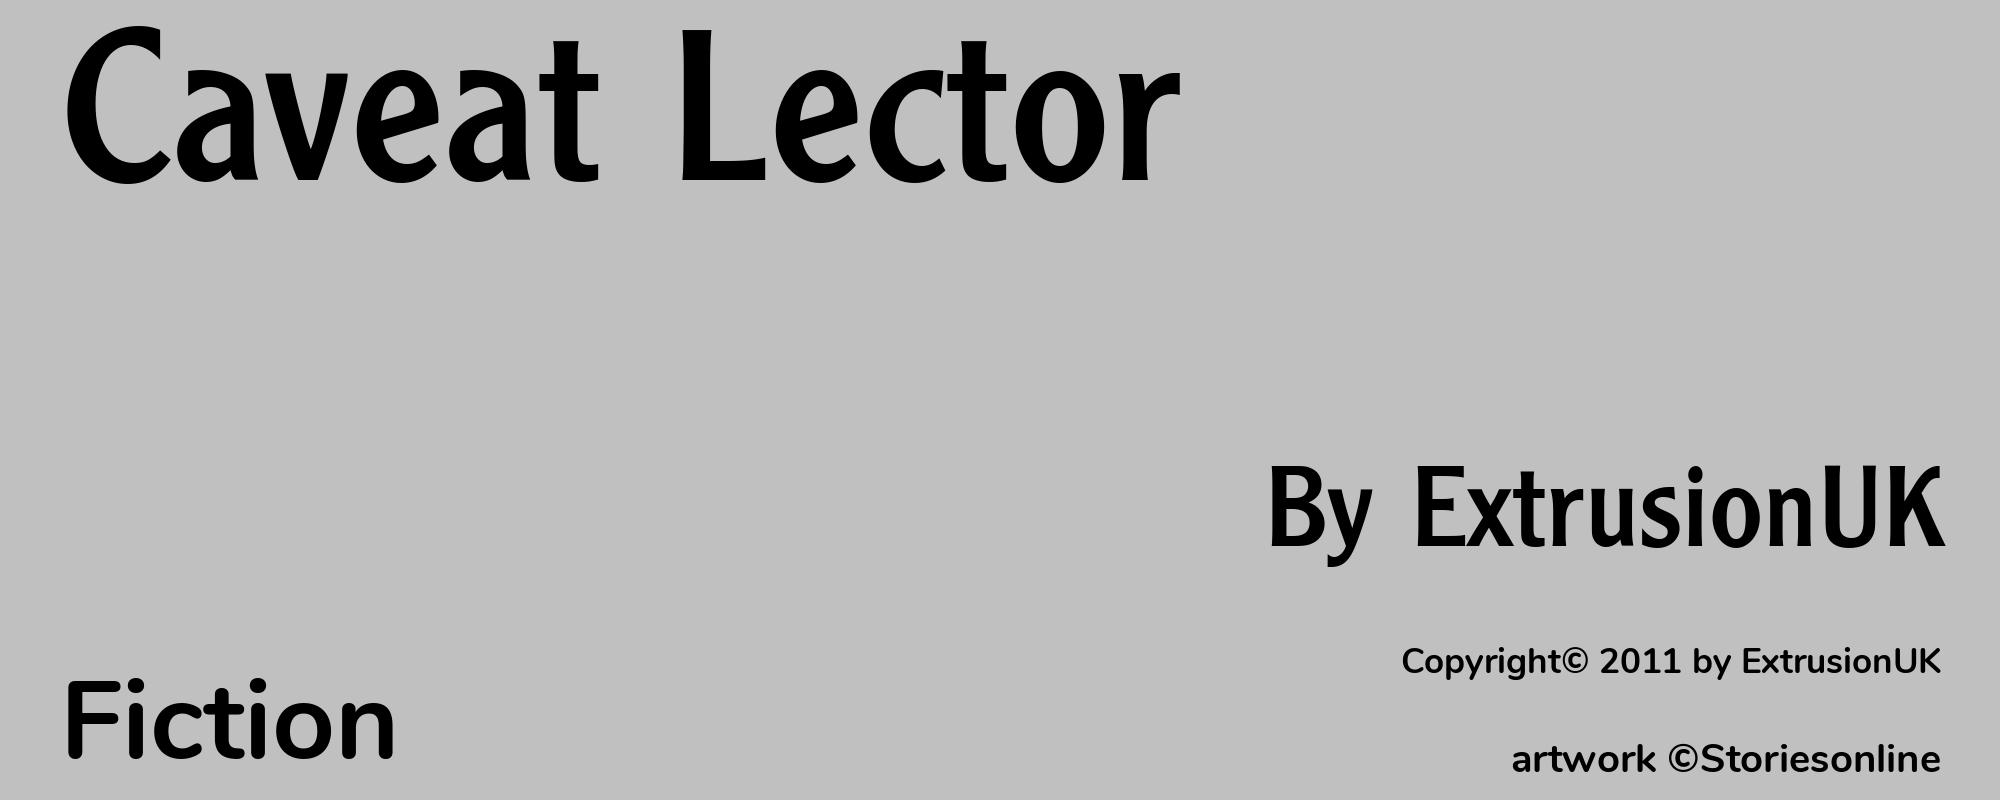 Caveat Lector - Cover